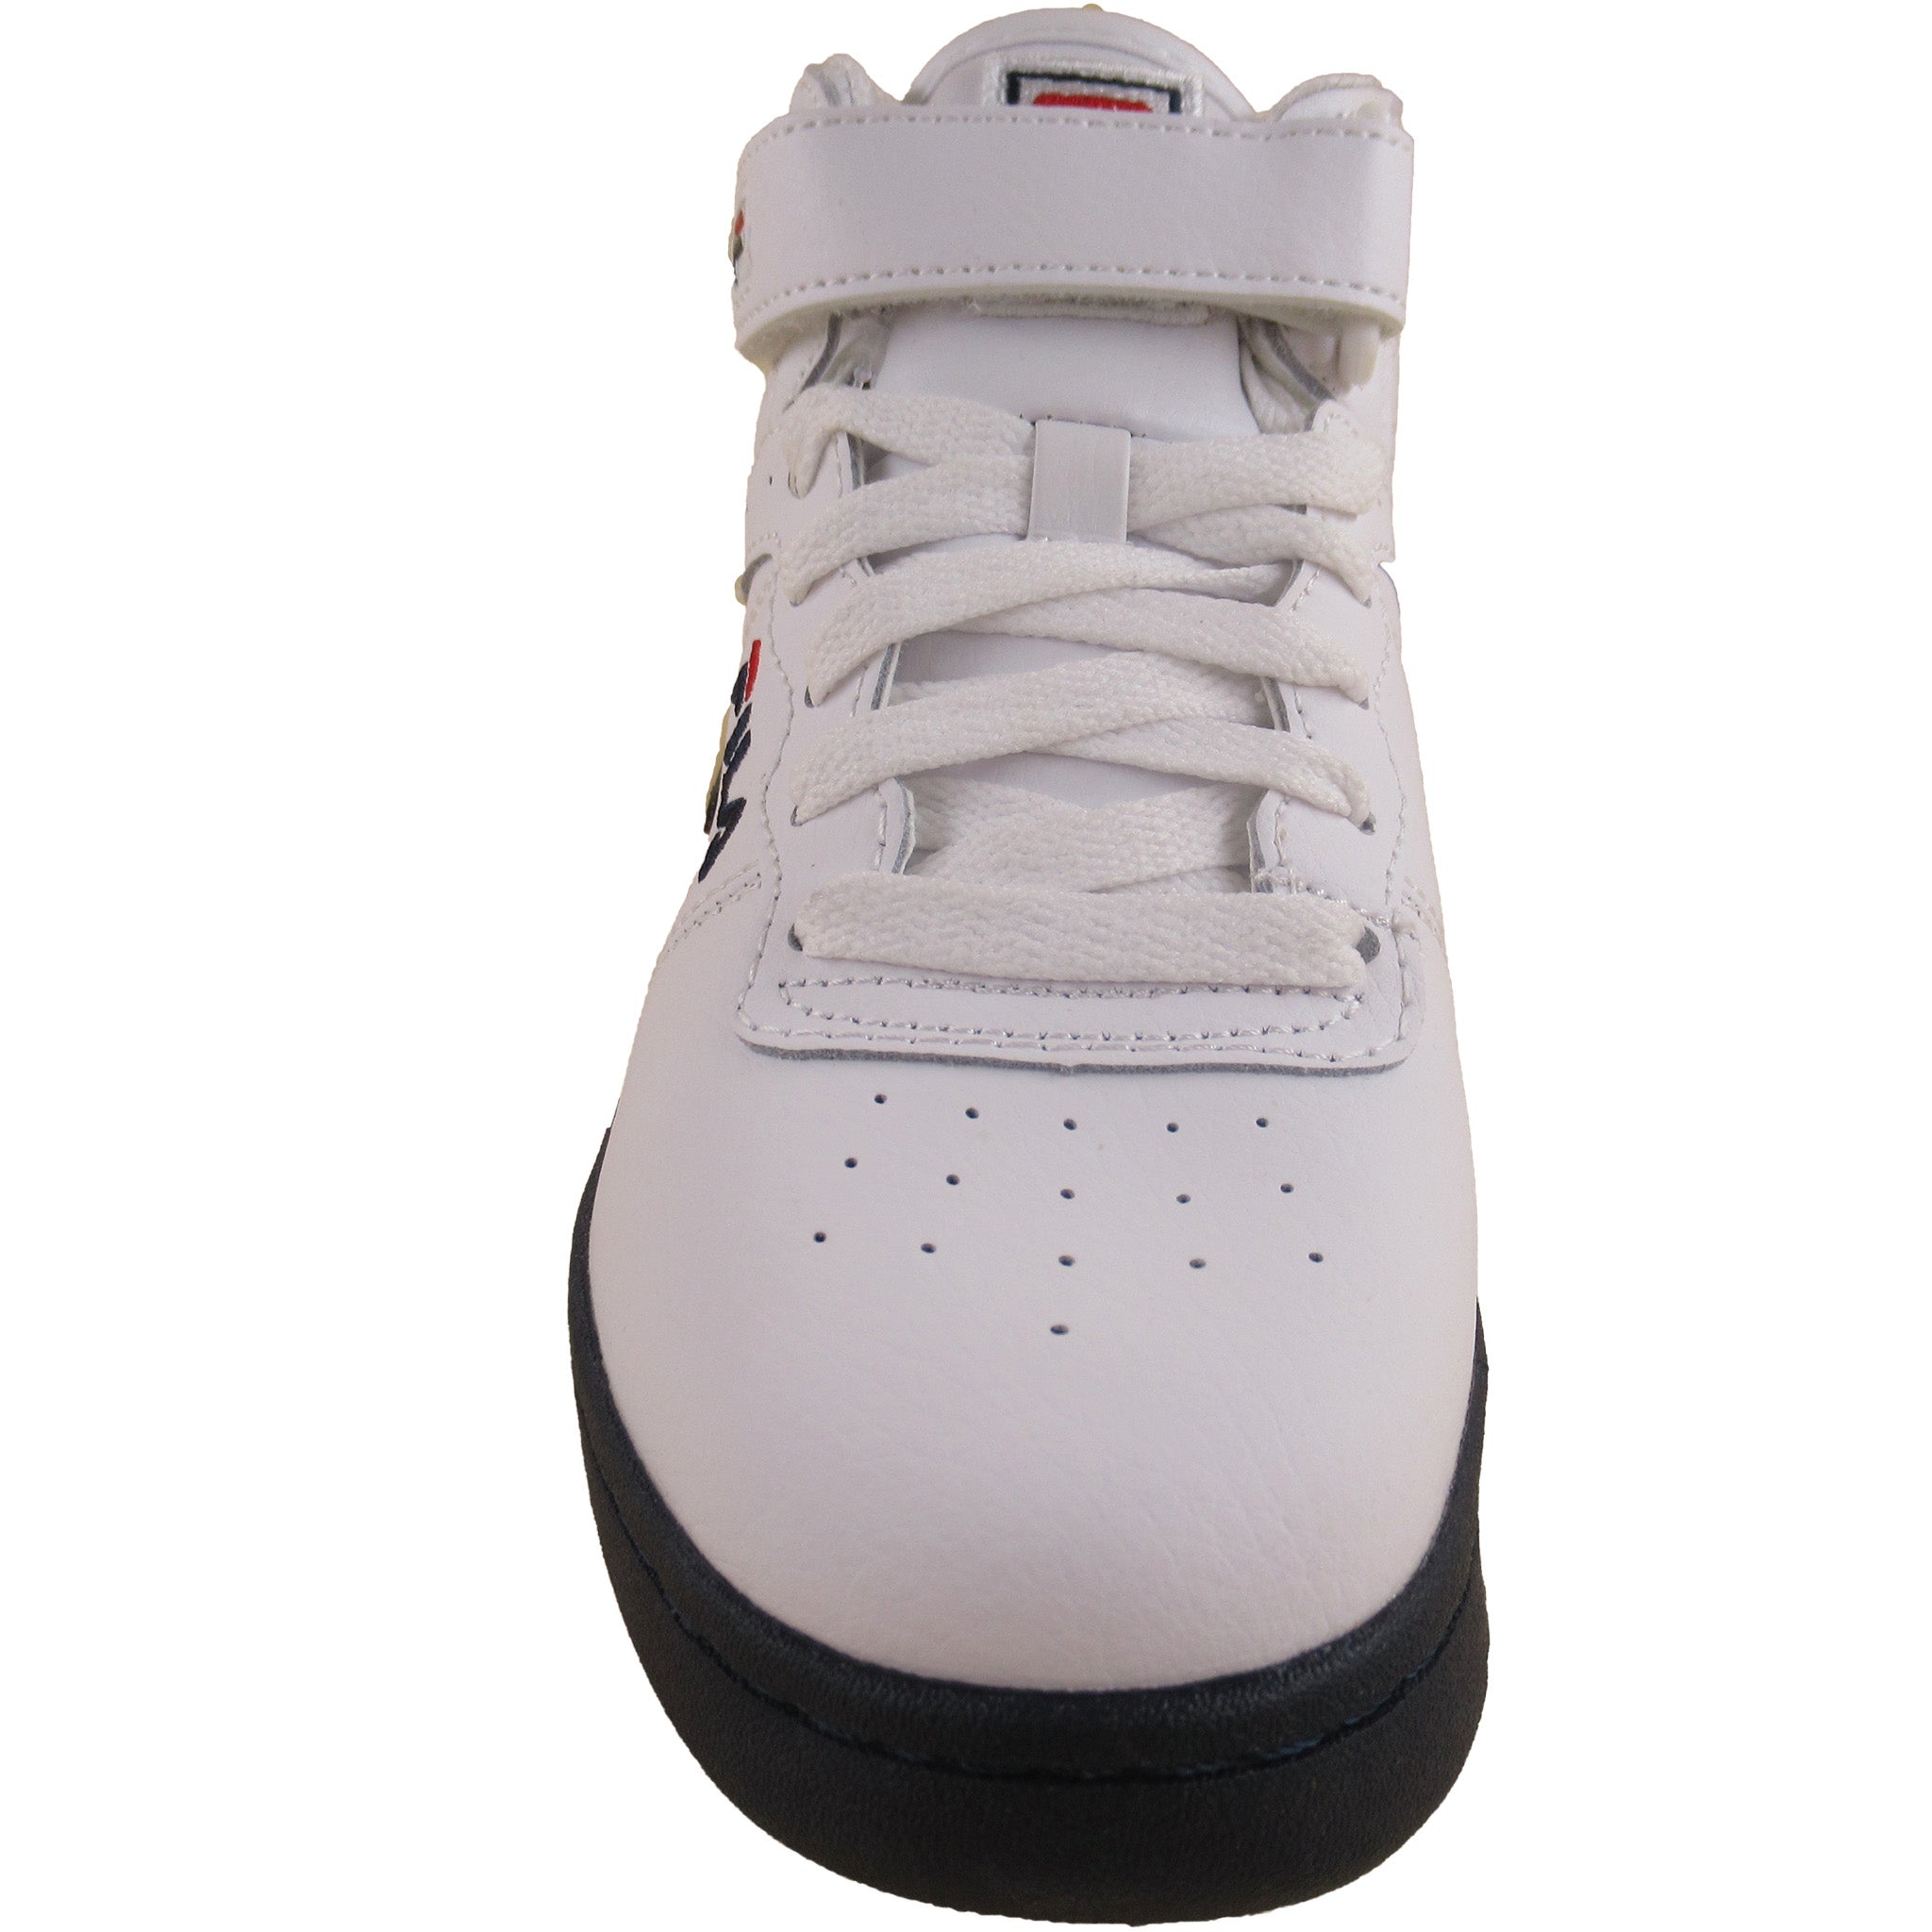 Red Fila Kids More – Grade-School Shoe and Athletic Navy F-13 Store That Shoes Casual White